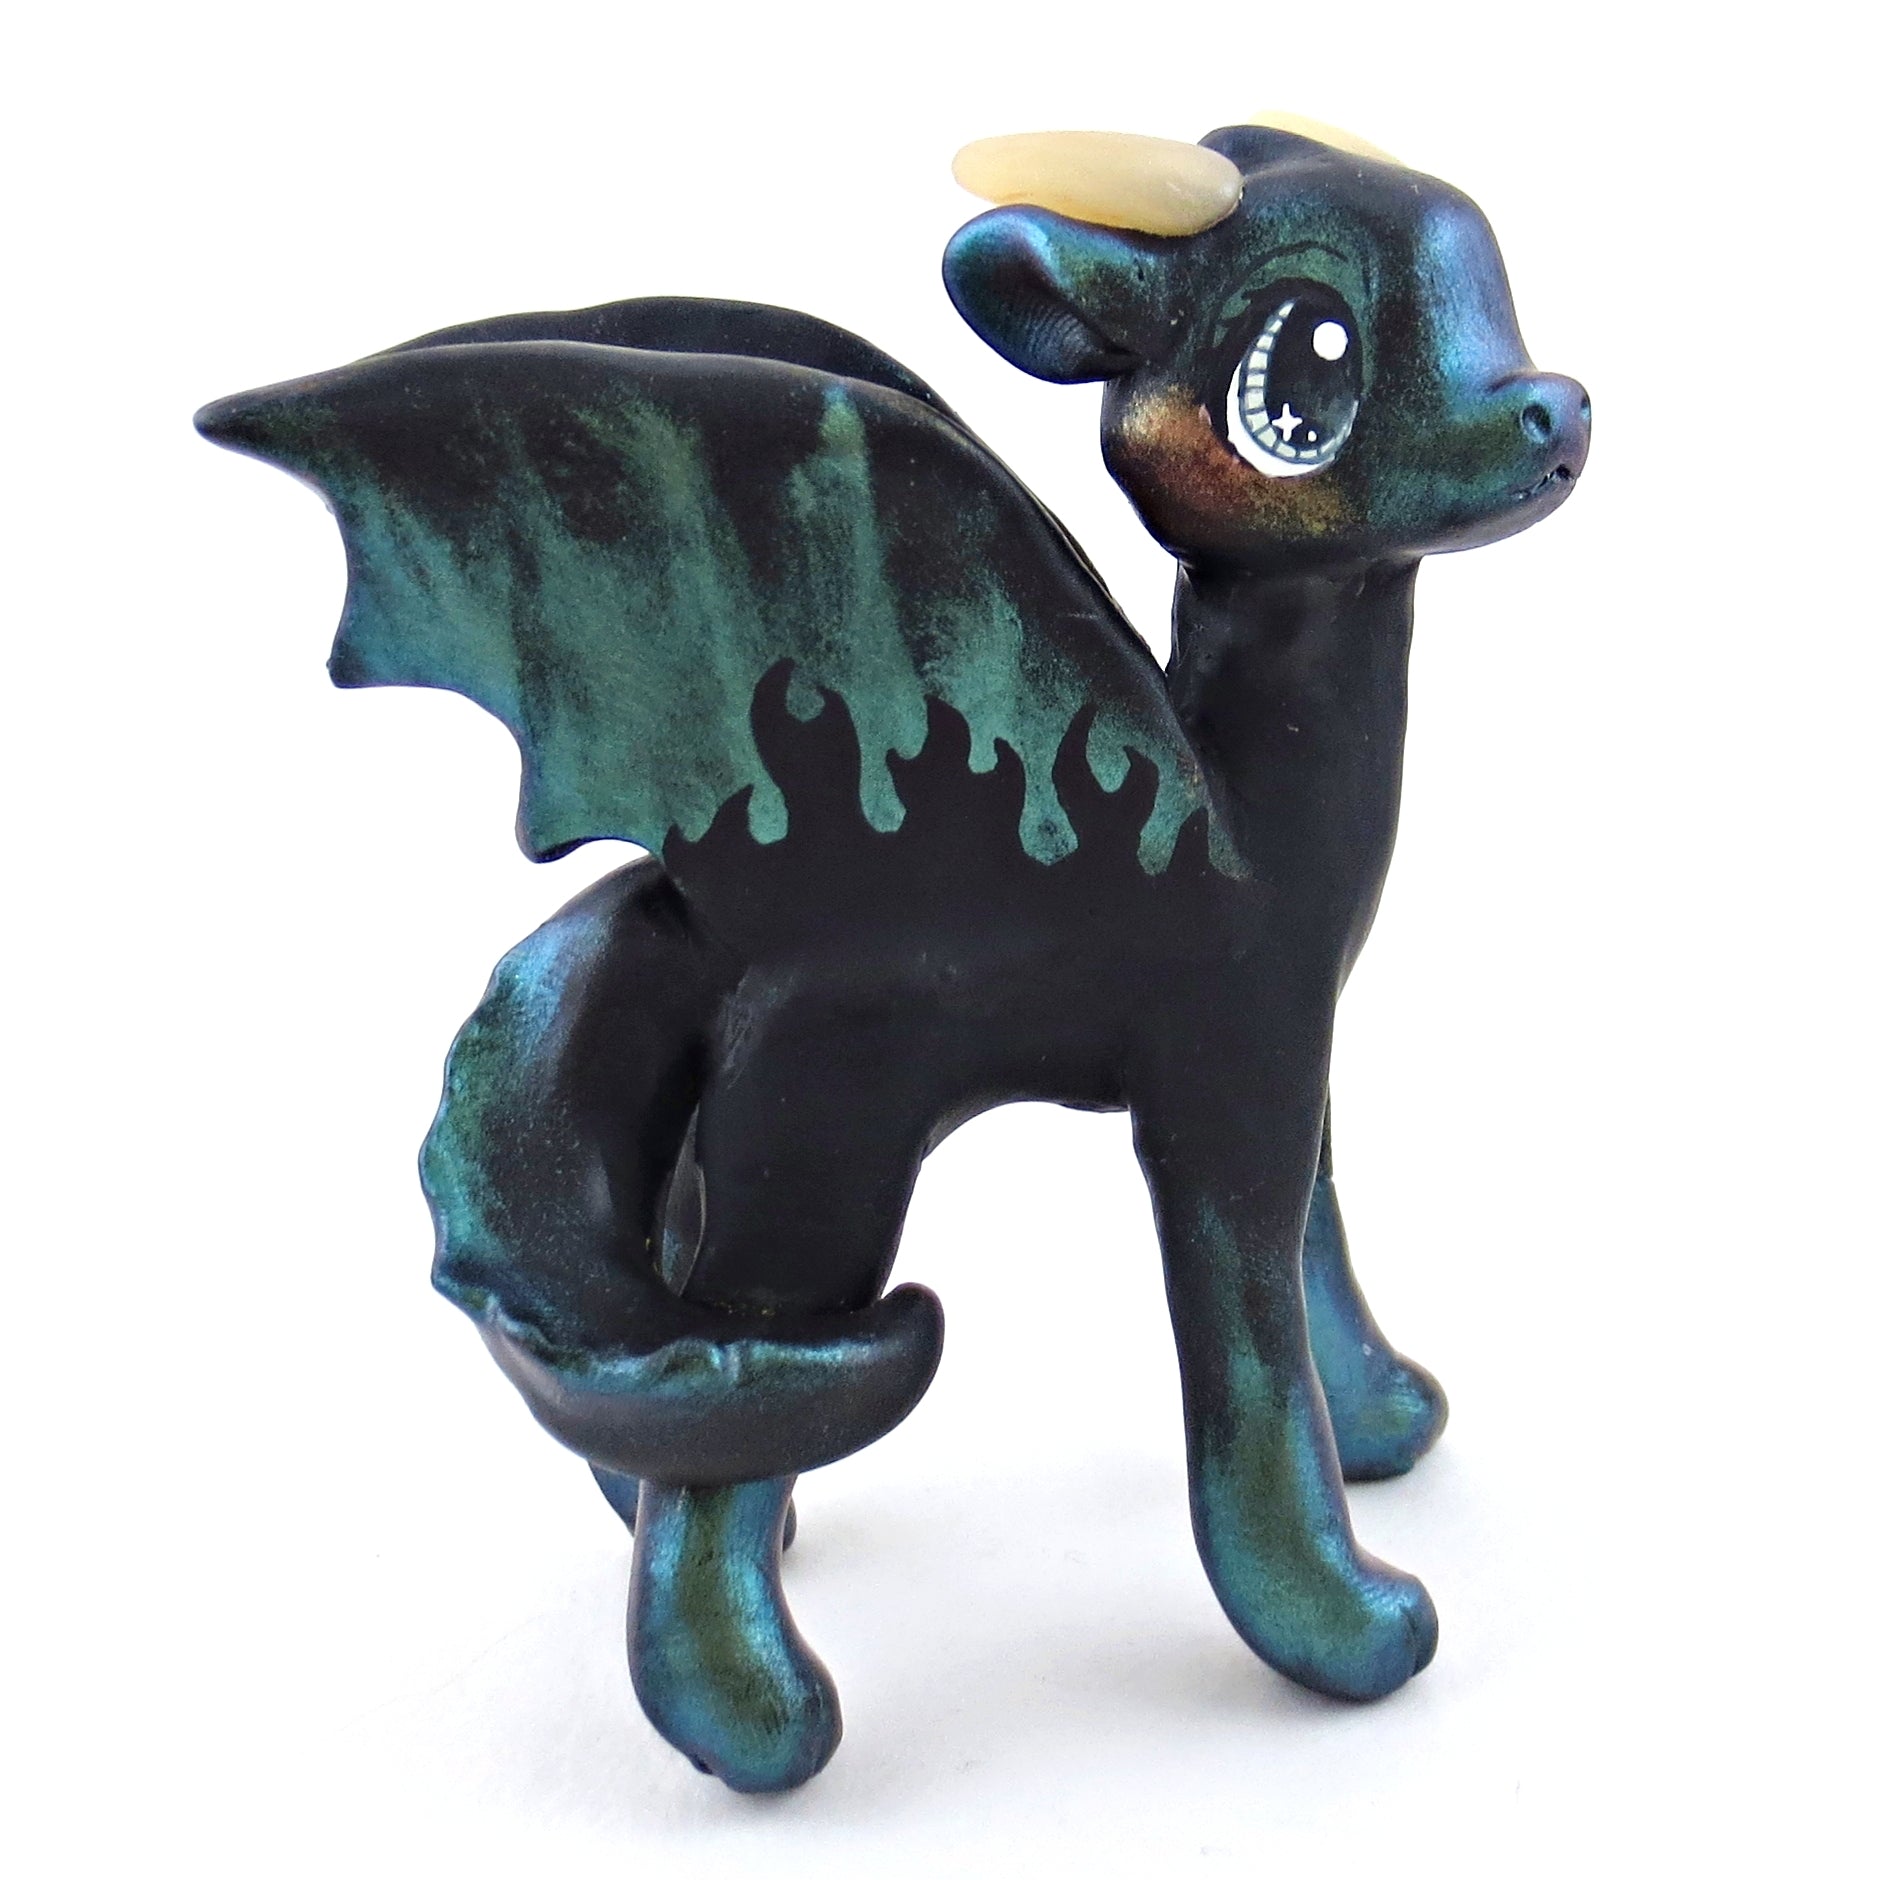 Green Fire Dragon Figurine - Polymer Clay Elementals Collection